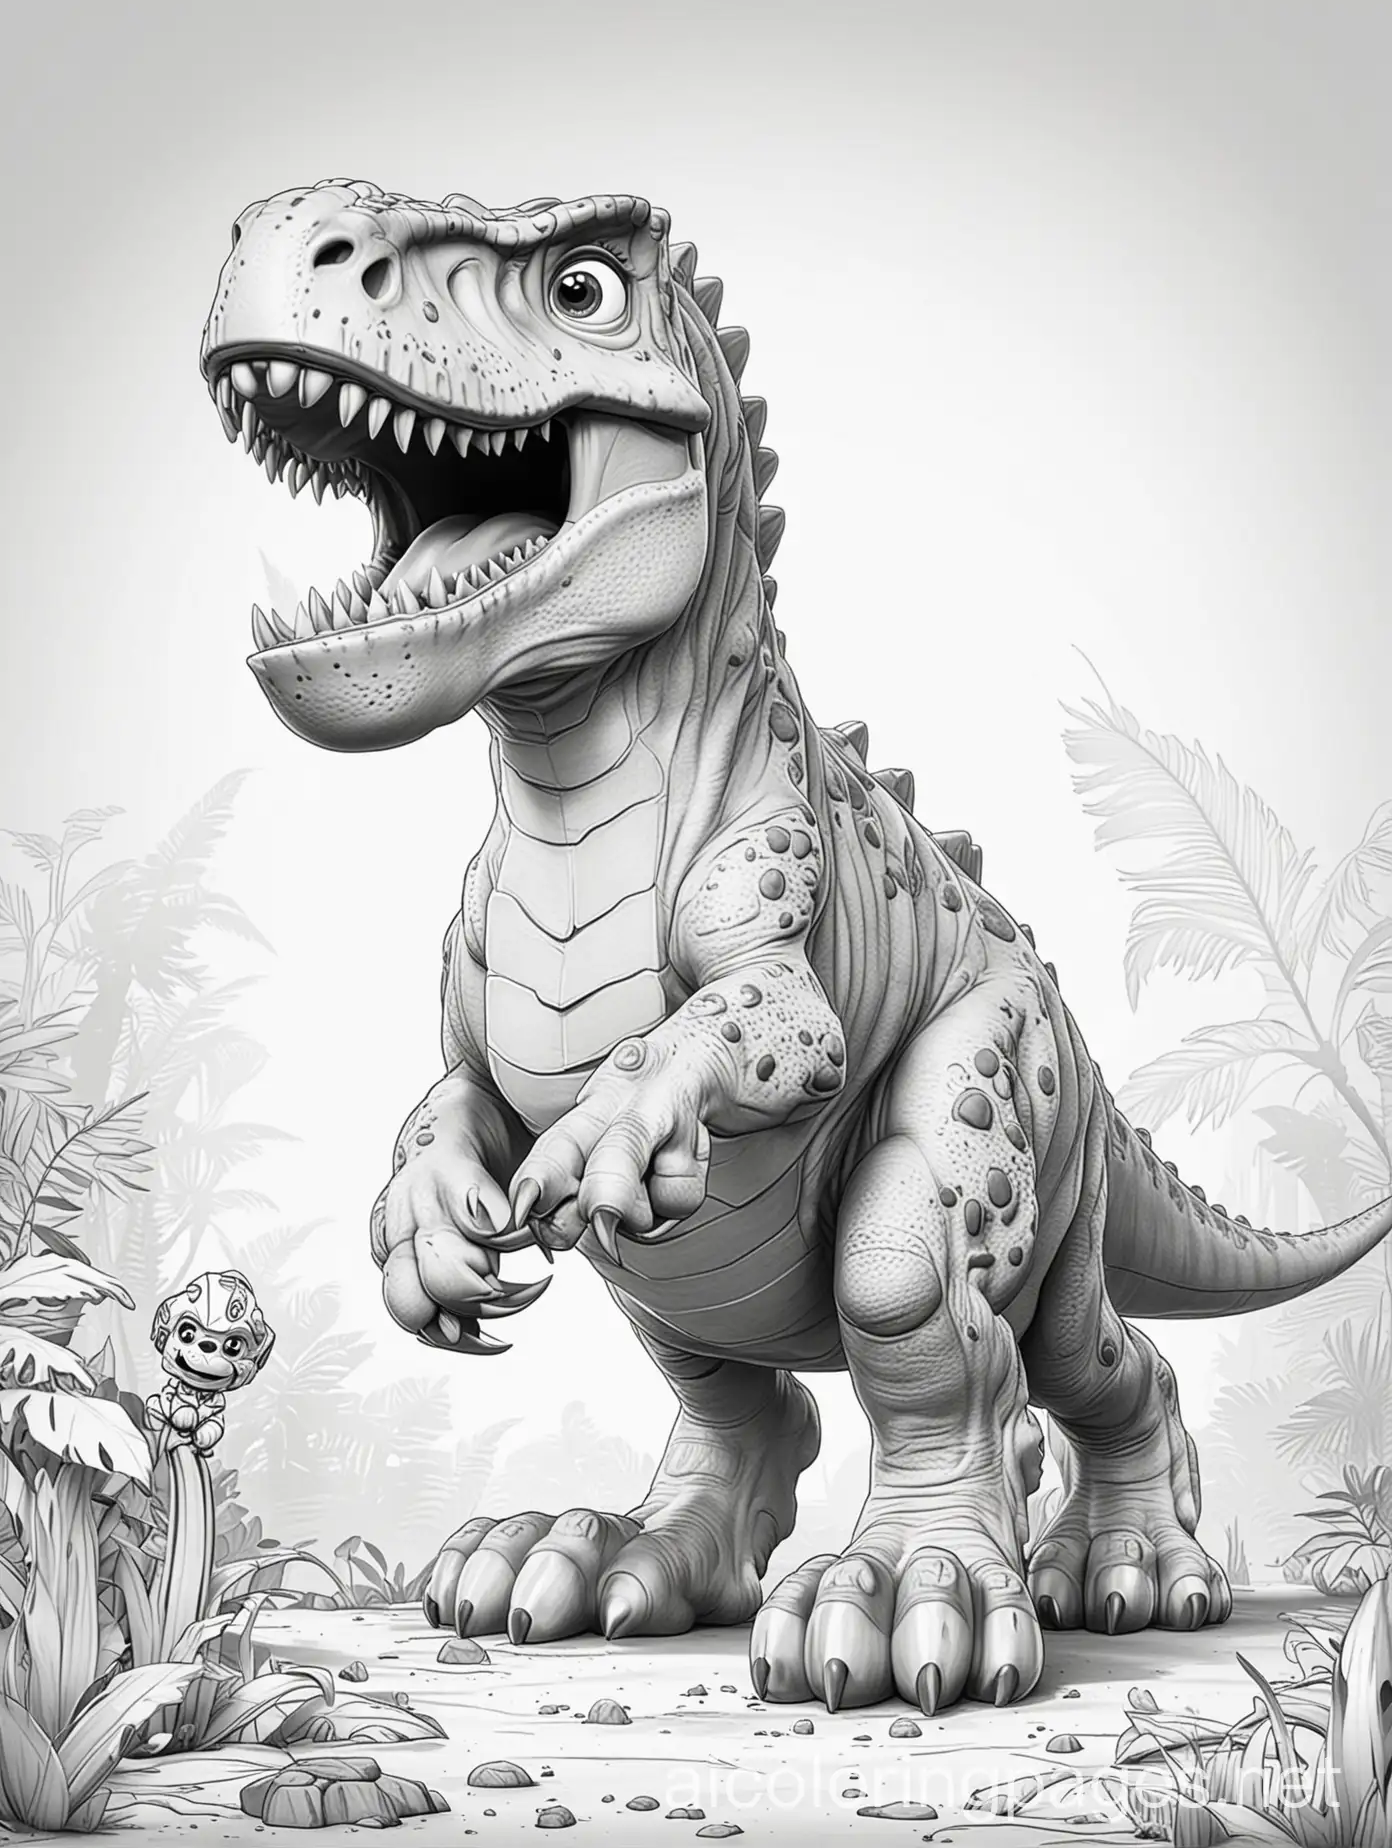 Paw-Patrol-and-Tyrannosaurus-Rex-Coloring-Page-Playful-Adventure-in-Black-and-White